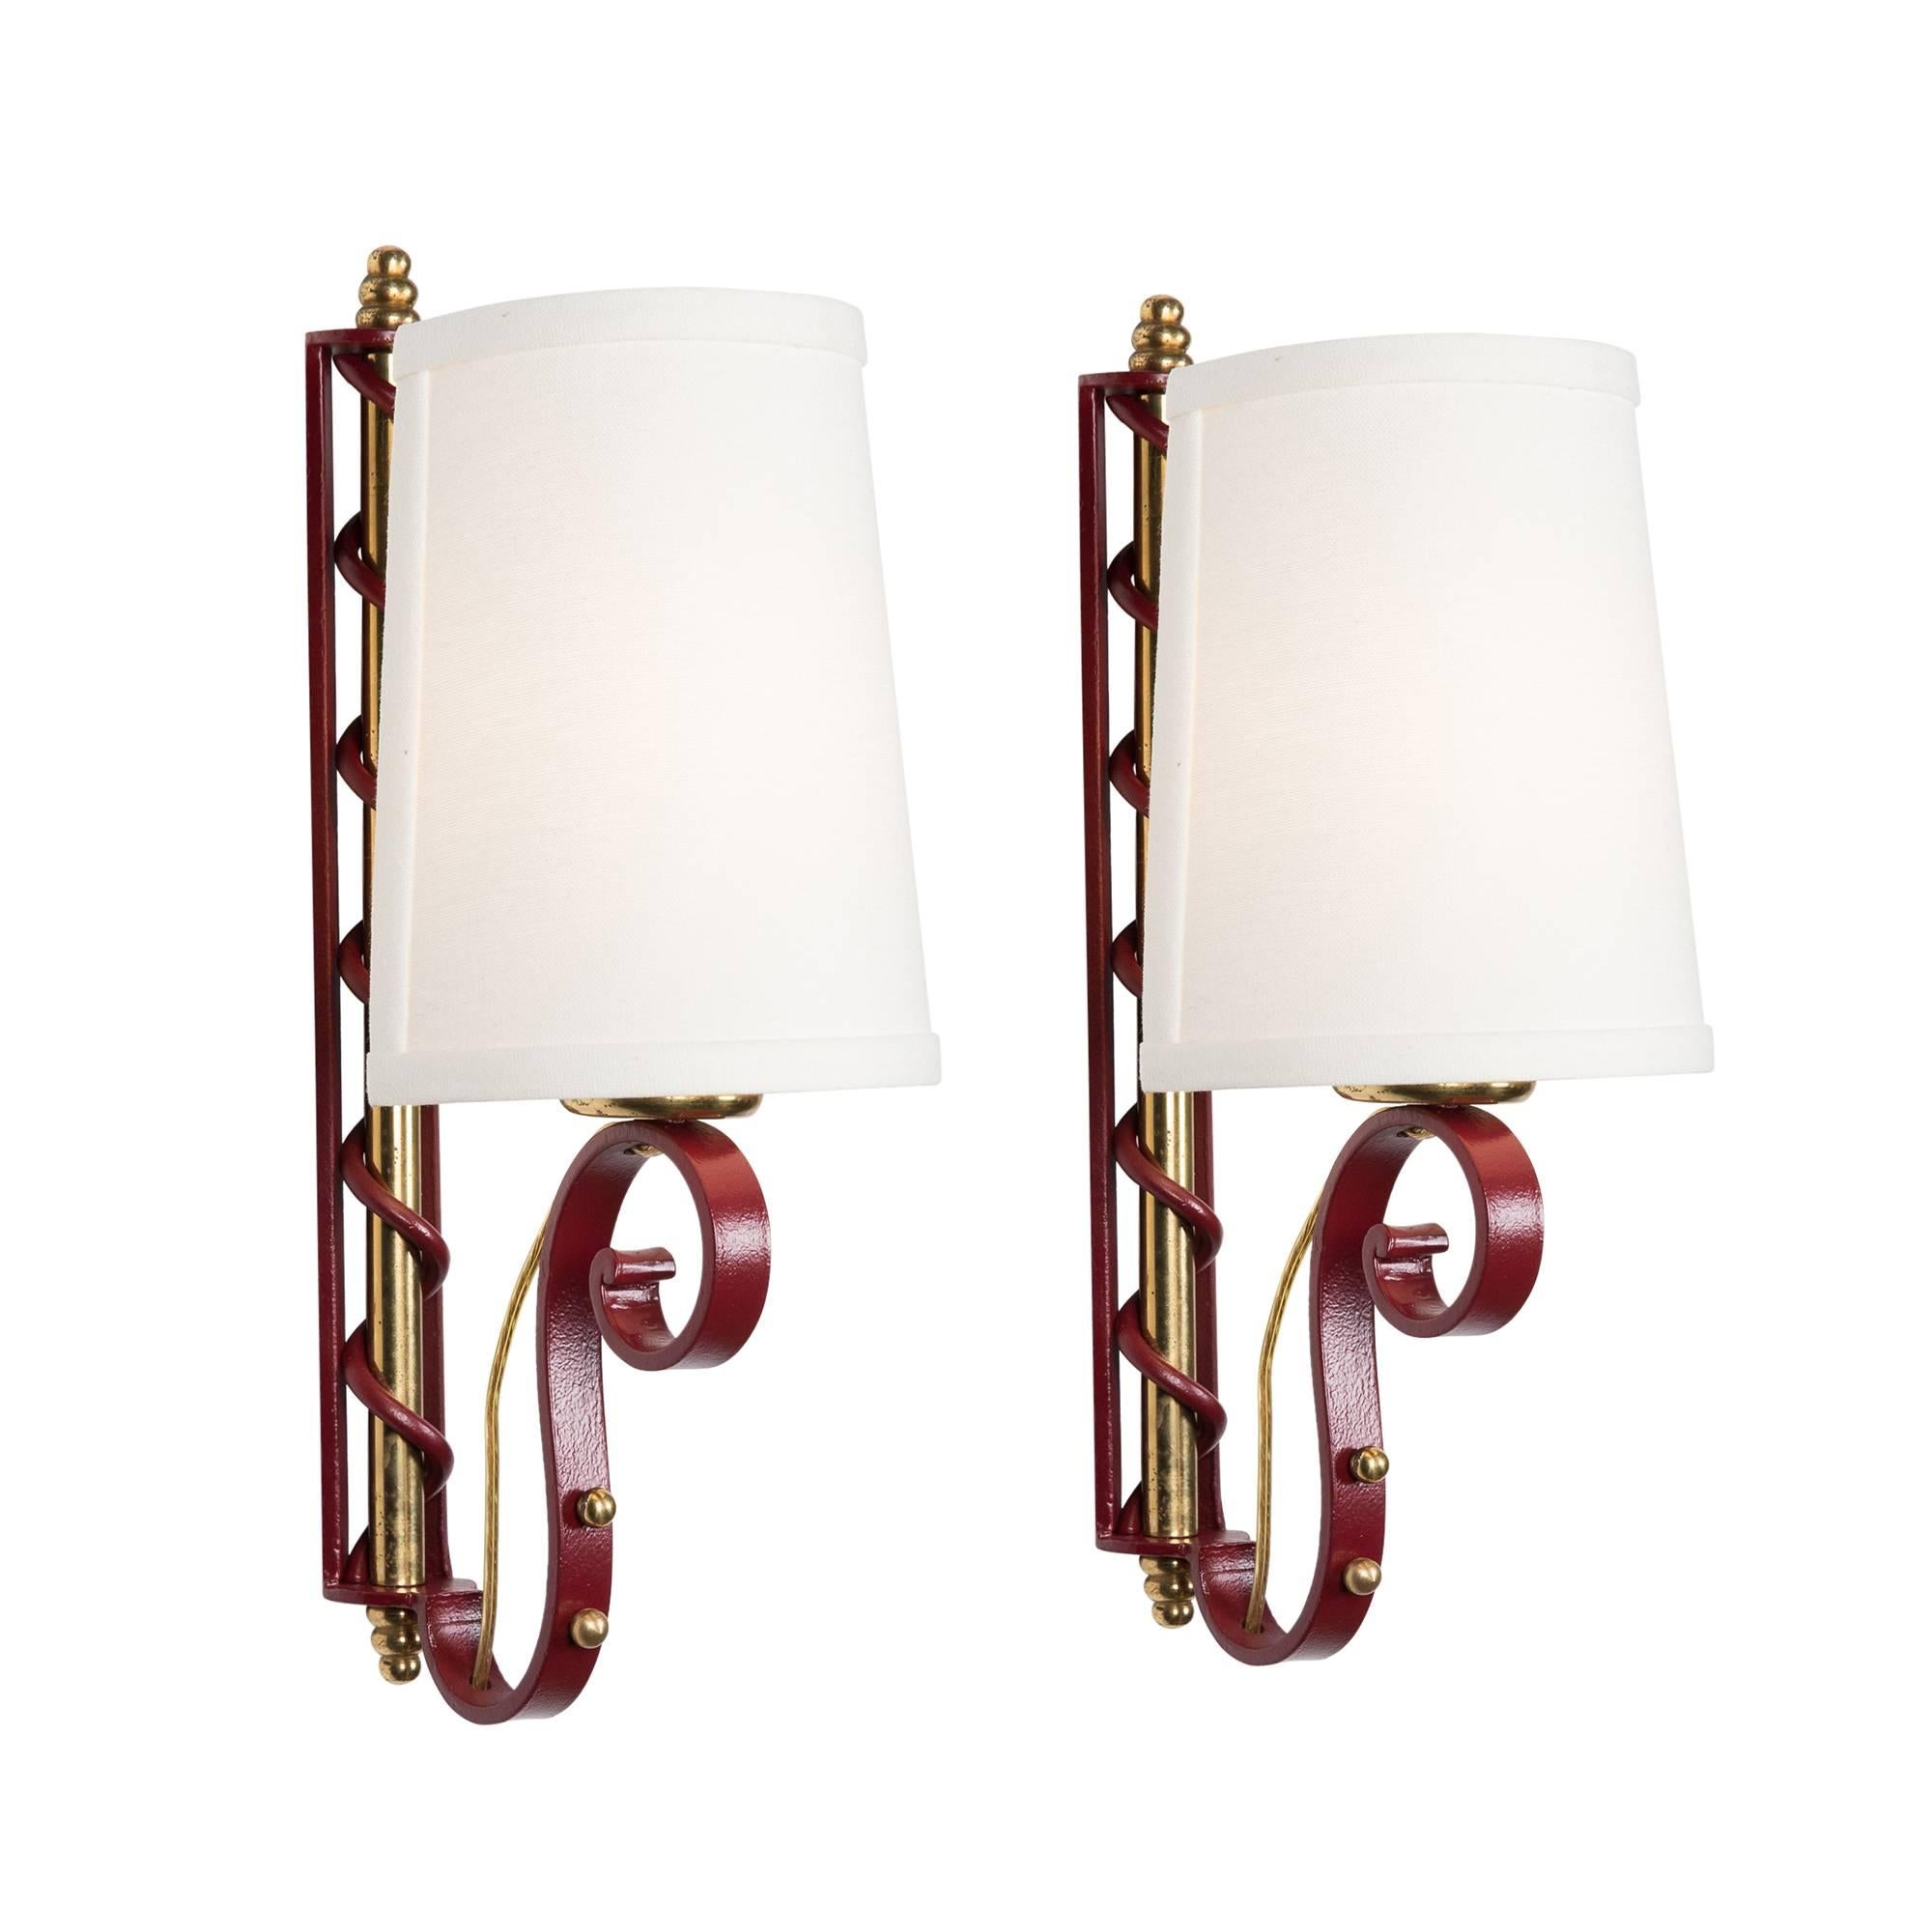 Pair of Red Lacquered Iron Sconces, French, 1950s For Sale 2